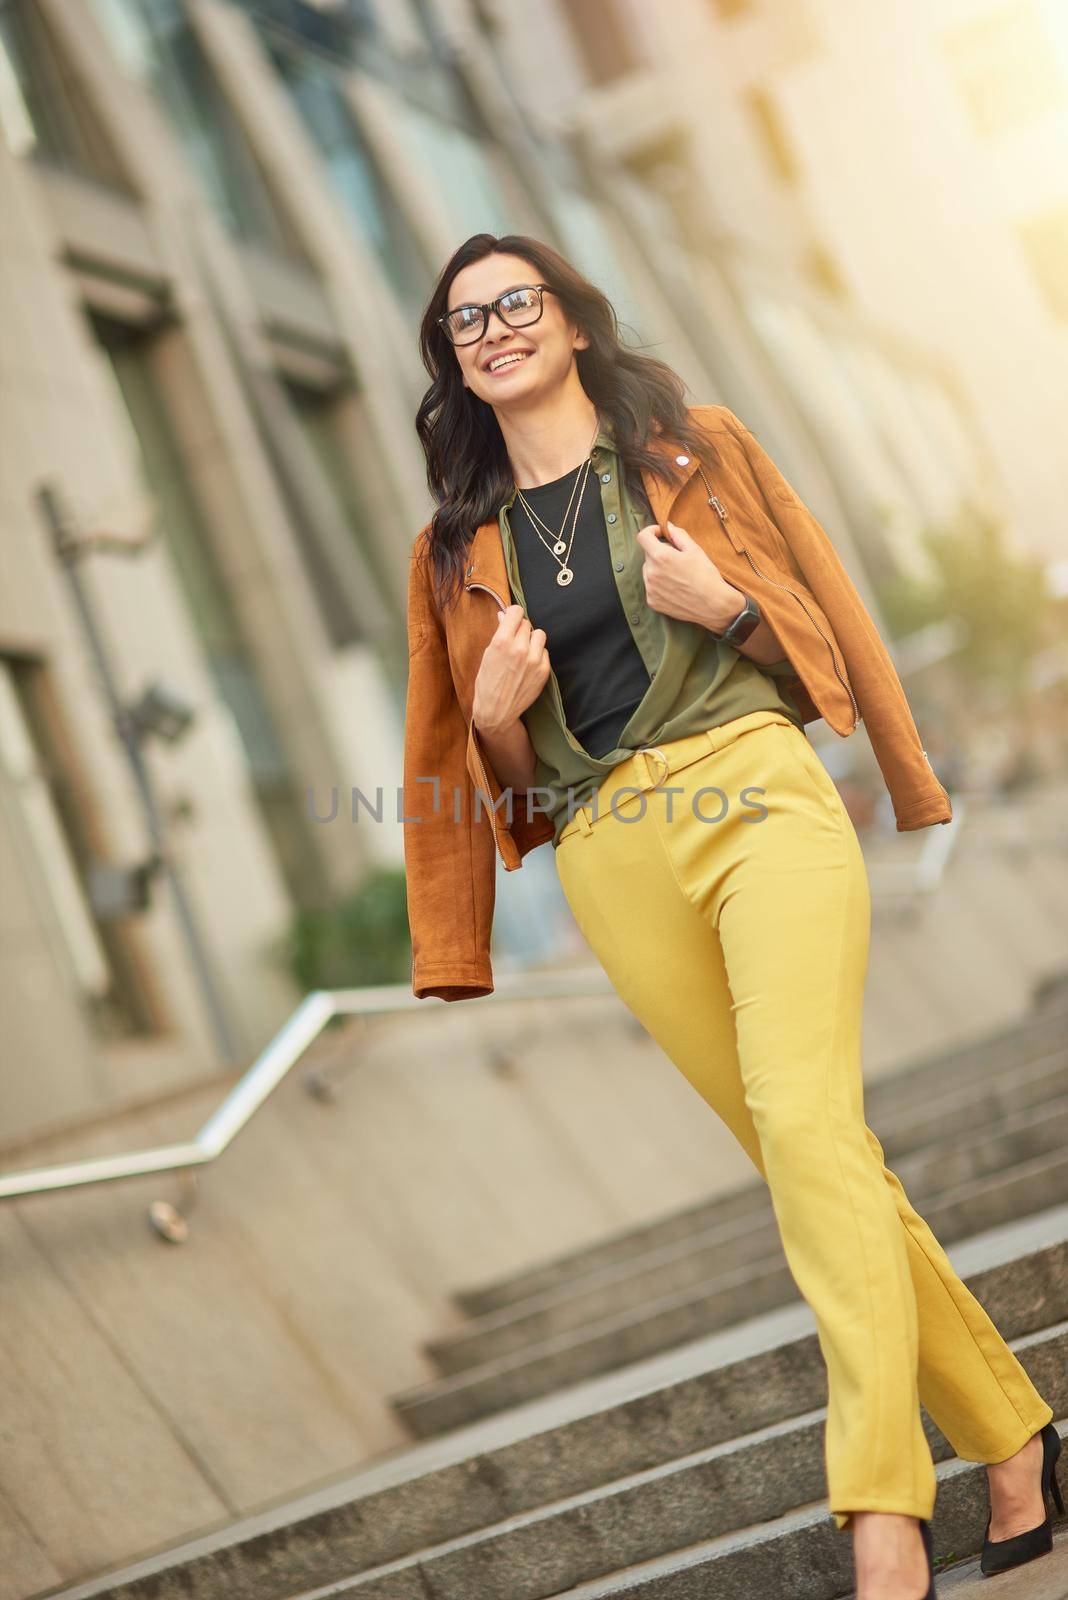 Enjoying nice day outdoors. Full length of a young beautiful and stylish caucasian woman or business lady walking city streets and smiling, vertical shot. People lifestyle concept